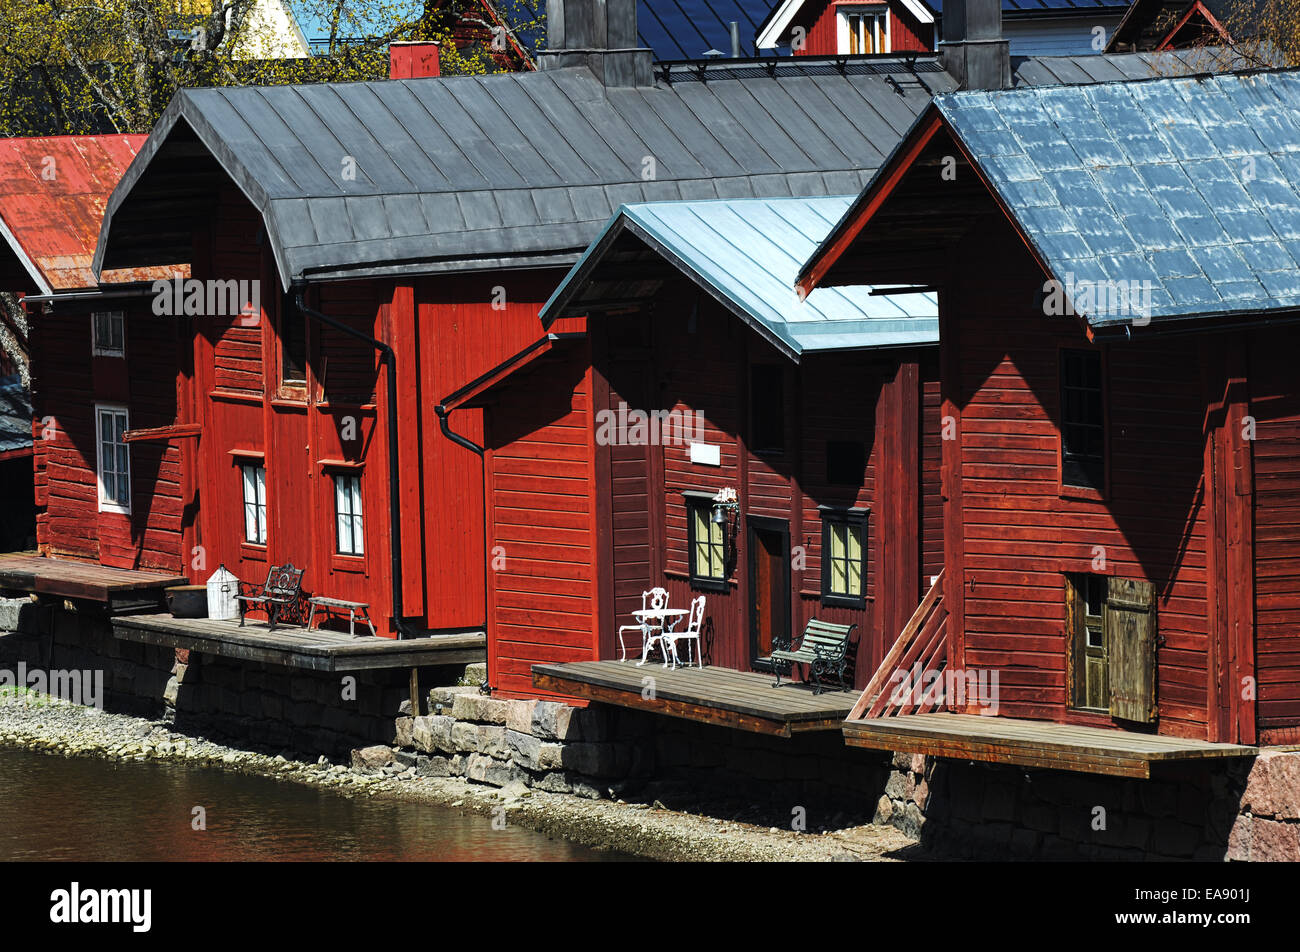 wooden barns near the river in the old town of Porvoo, Finland, Europe Stock Photo